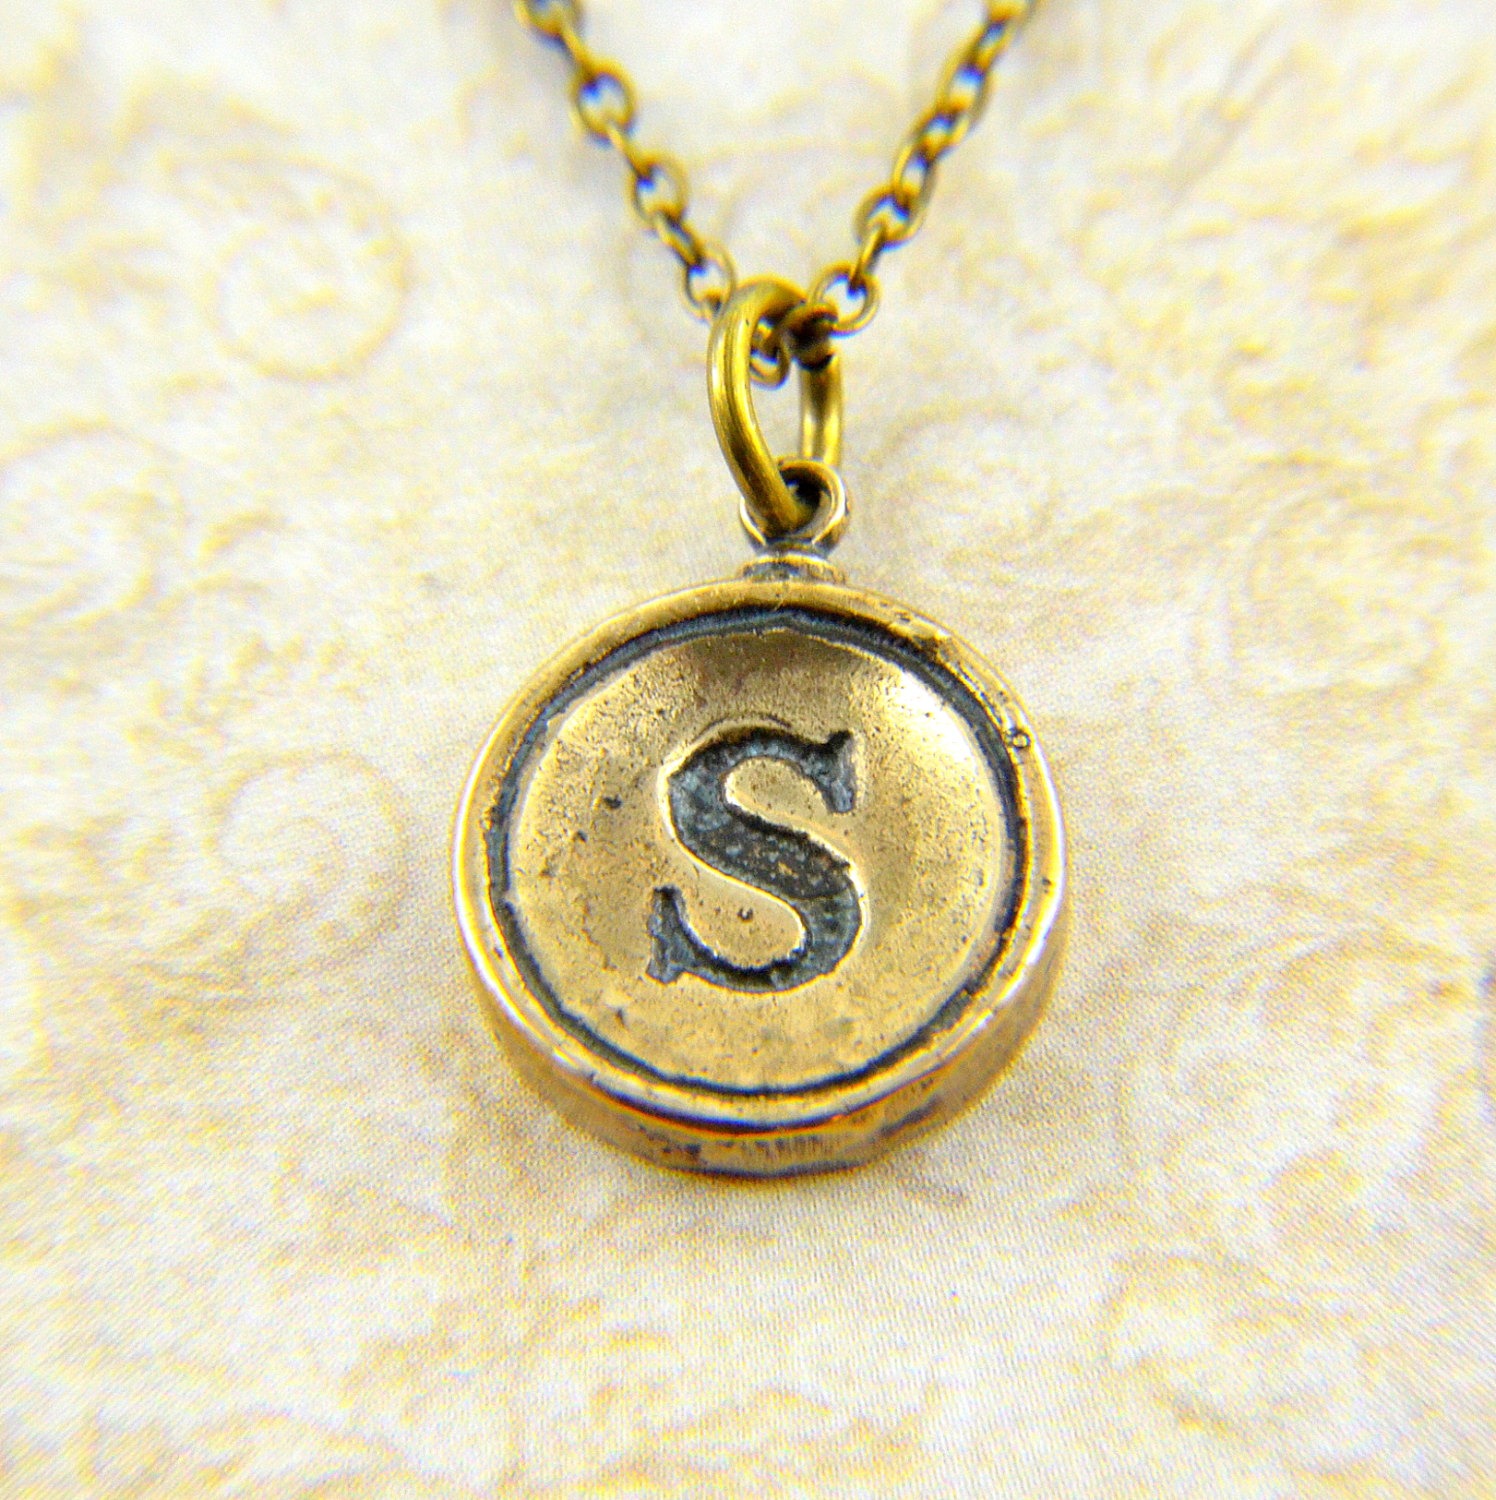 Letter S Typewriter Key Pendant Necklace Charm - Bronze - Other Letters Available steampunk buy now online